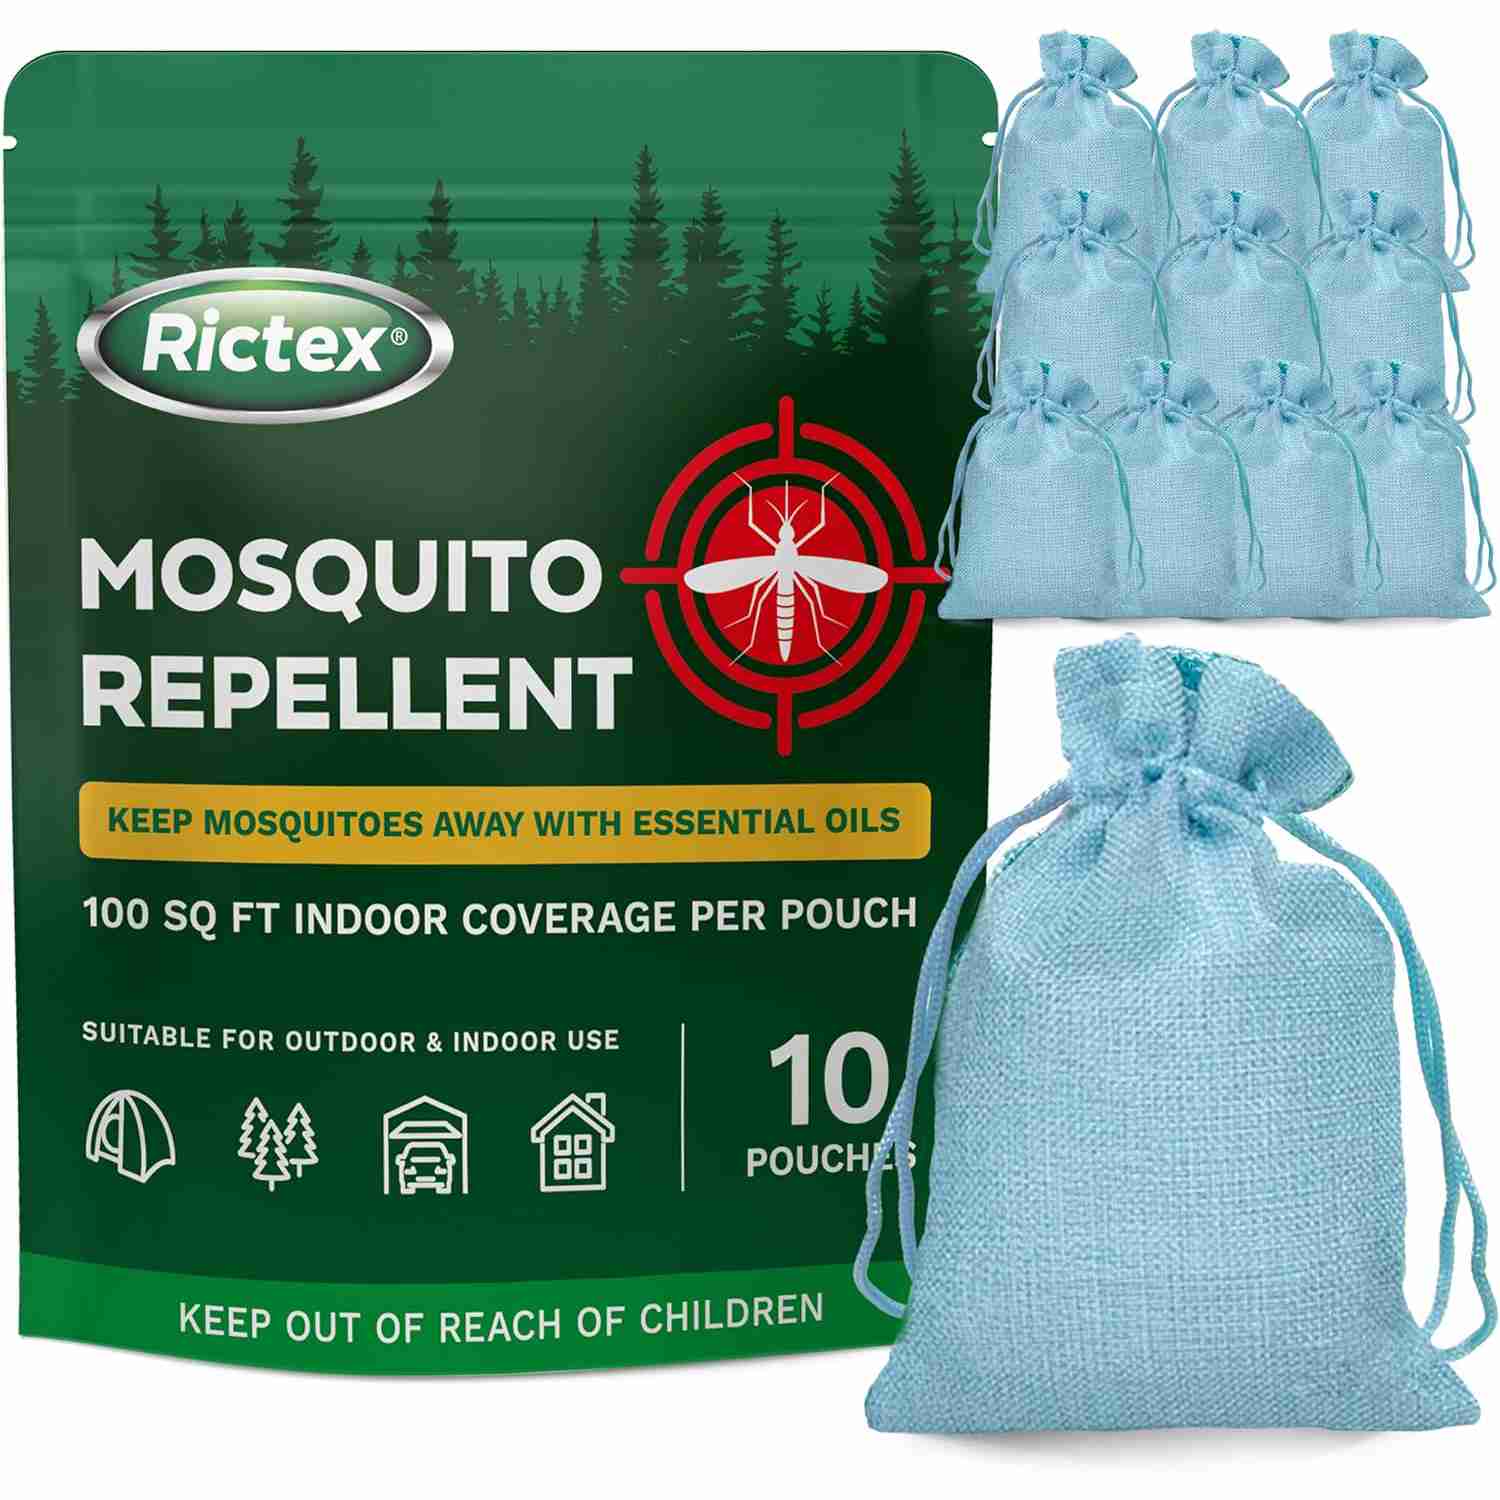 mosquito-repellent-outdoor with cash back rebate